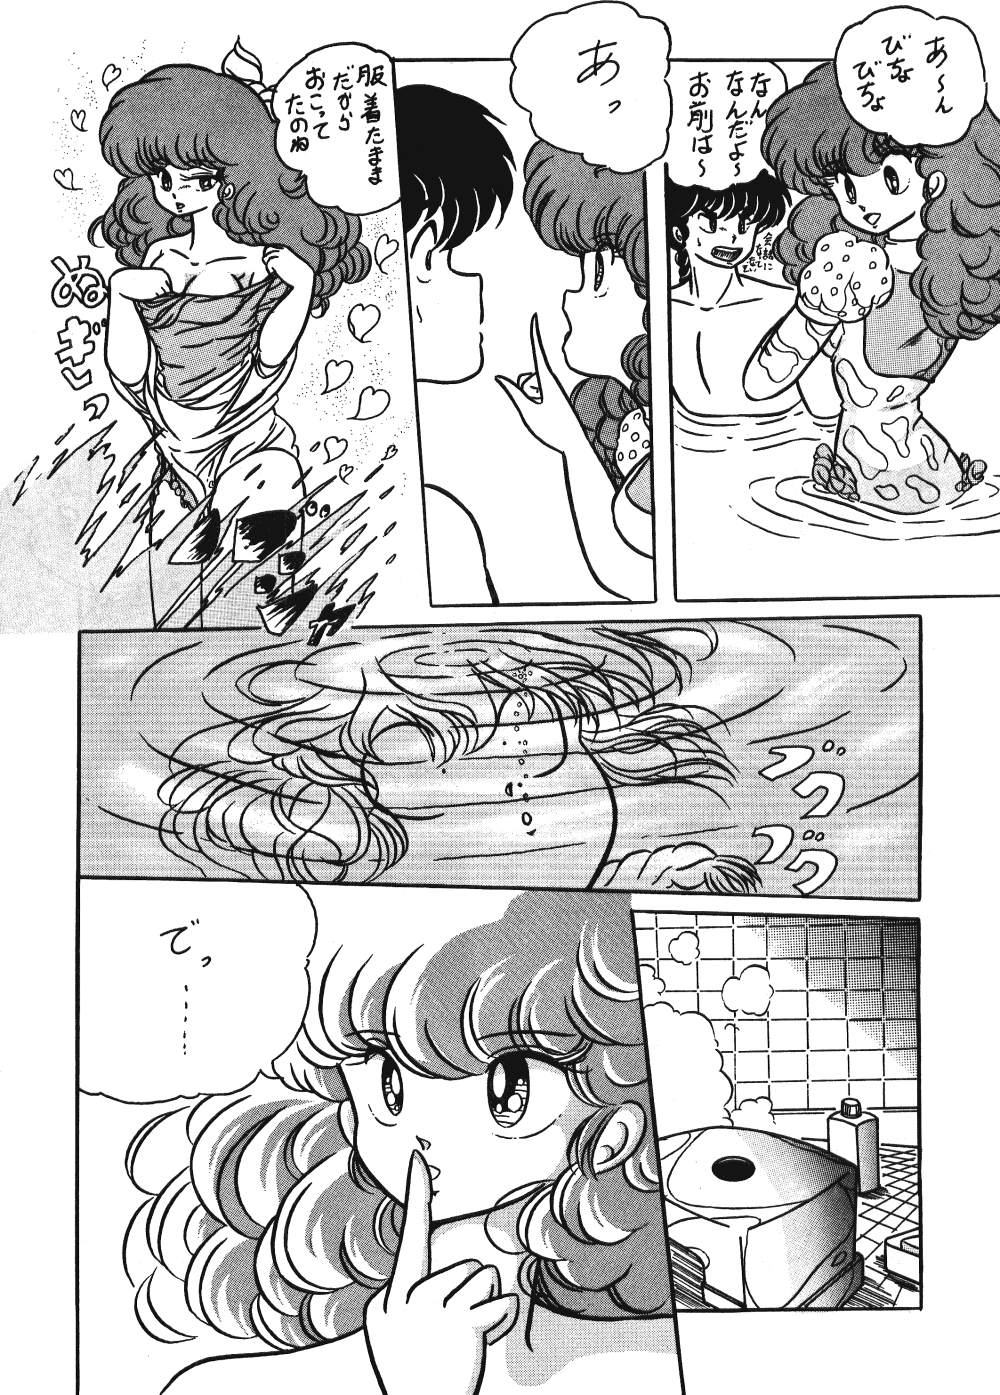 [C-COMPANY] C-COMPANY SPECIAL STAGE 2 (Ranma 1/2) page 15 full